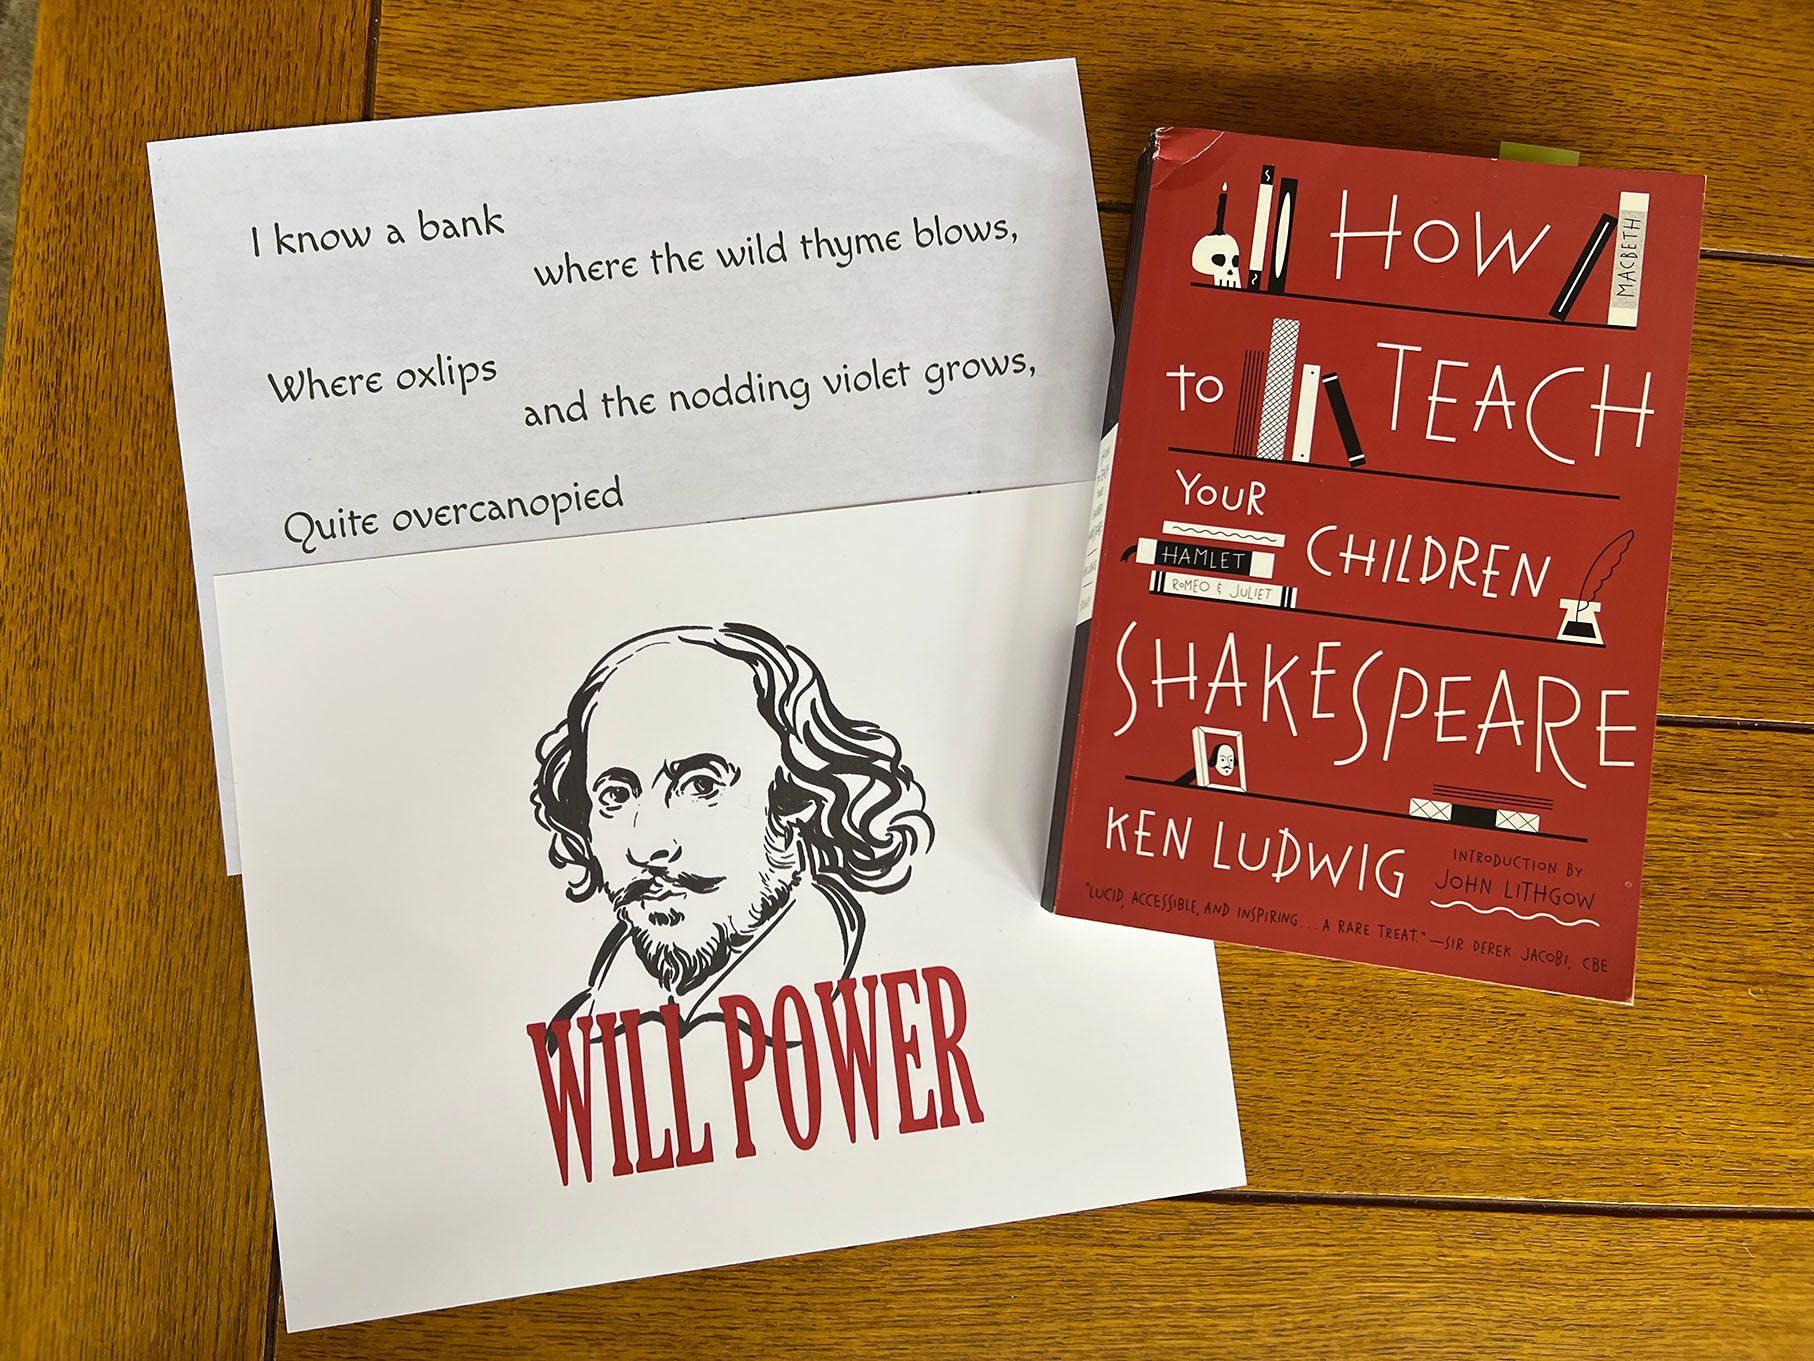 A book, "How to Teach Your Children Shakespeare," some lines from a play, and a picture of Shakespeare that says WILL POWER.